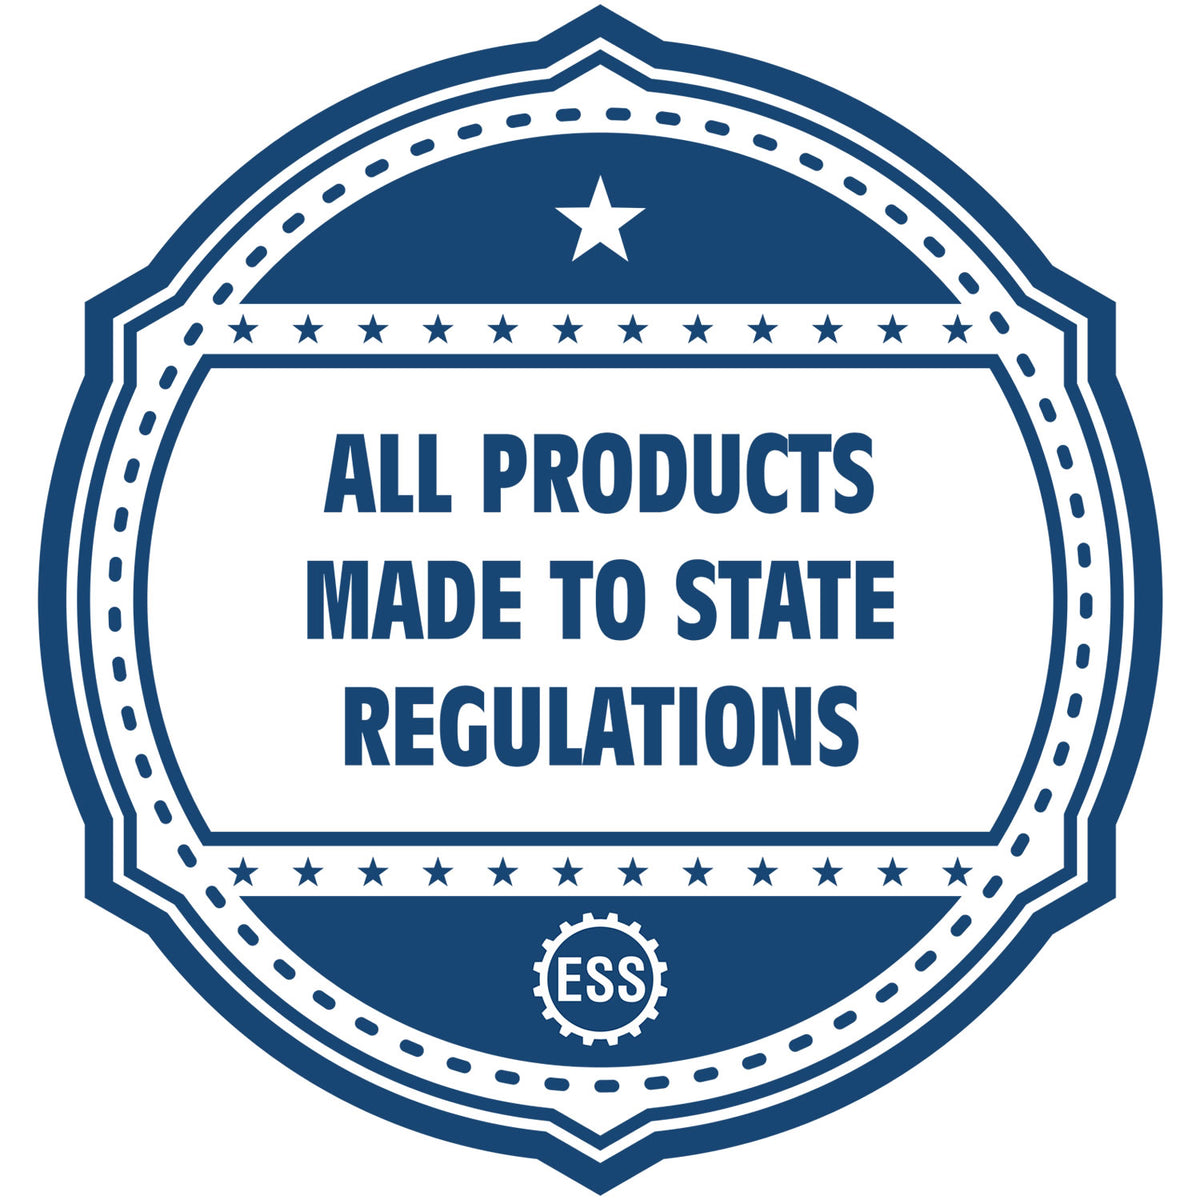 An icon or badge element for the State of Wyoming Soft Land Surveyor Embossing Seal showing that this product is made in compliance with state regulations.